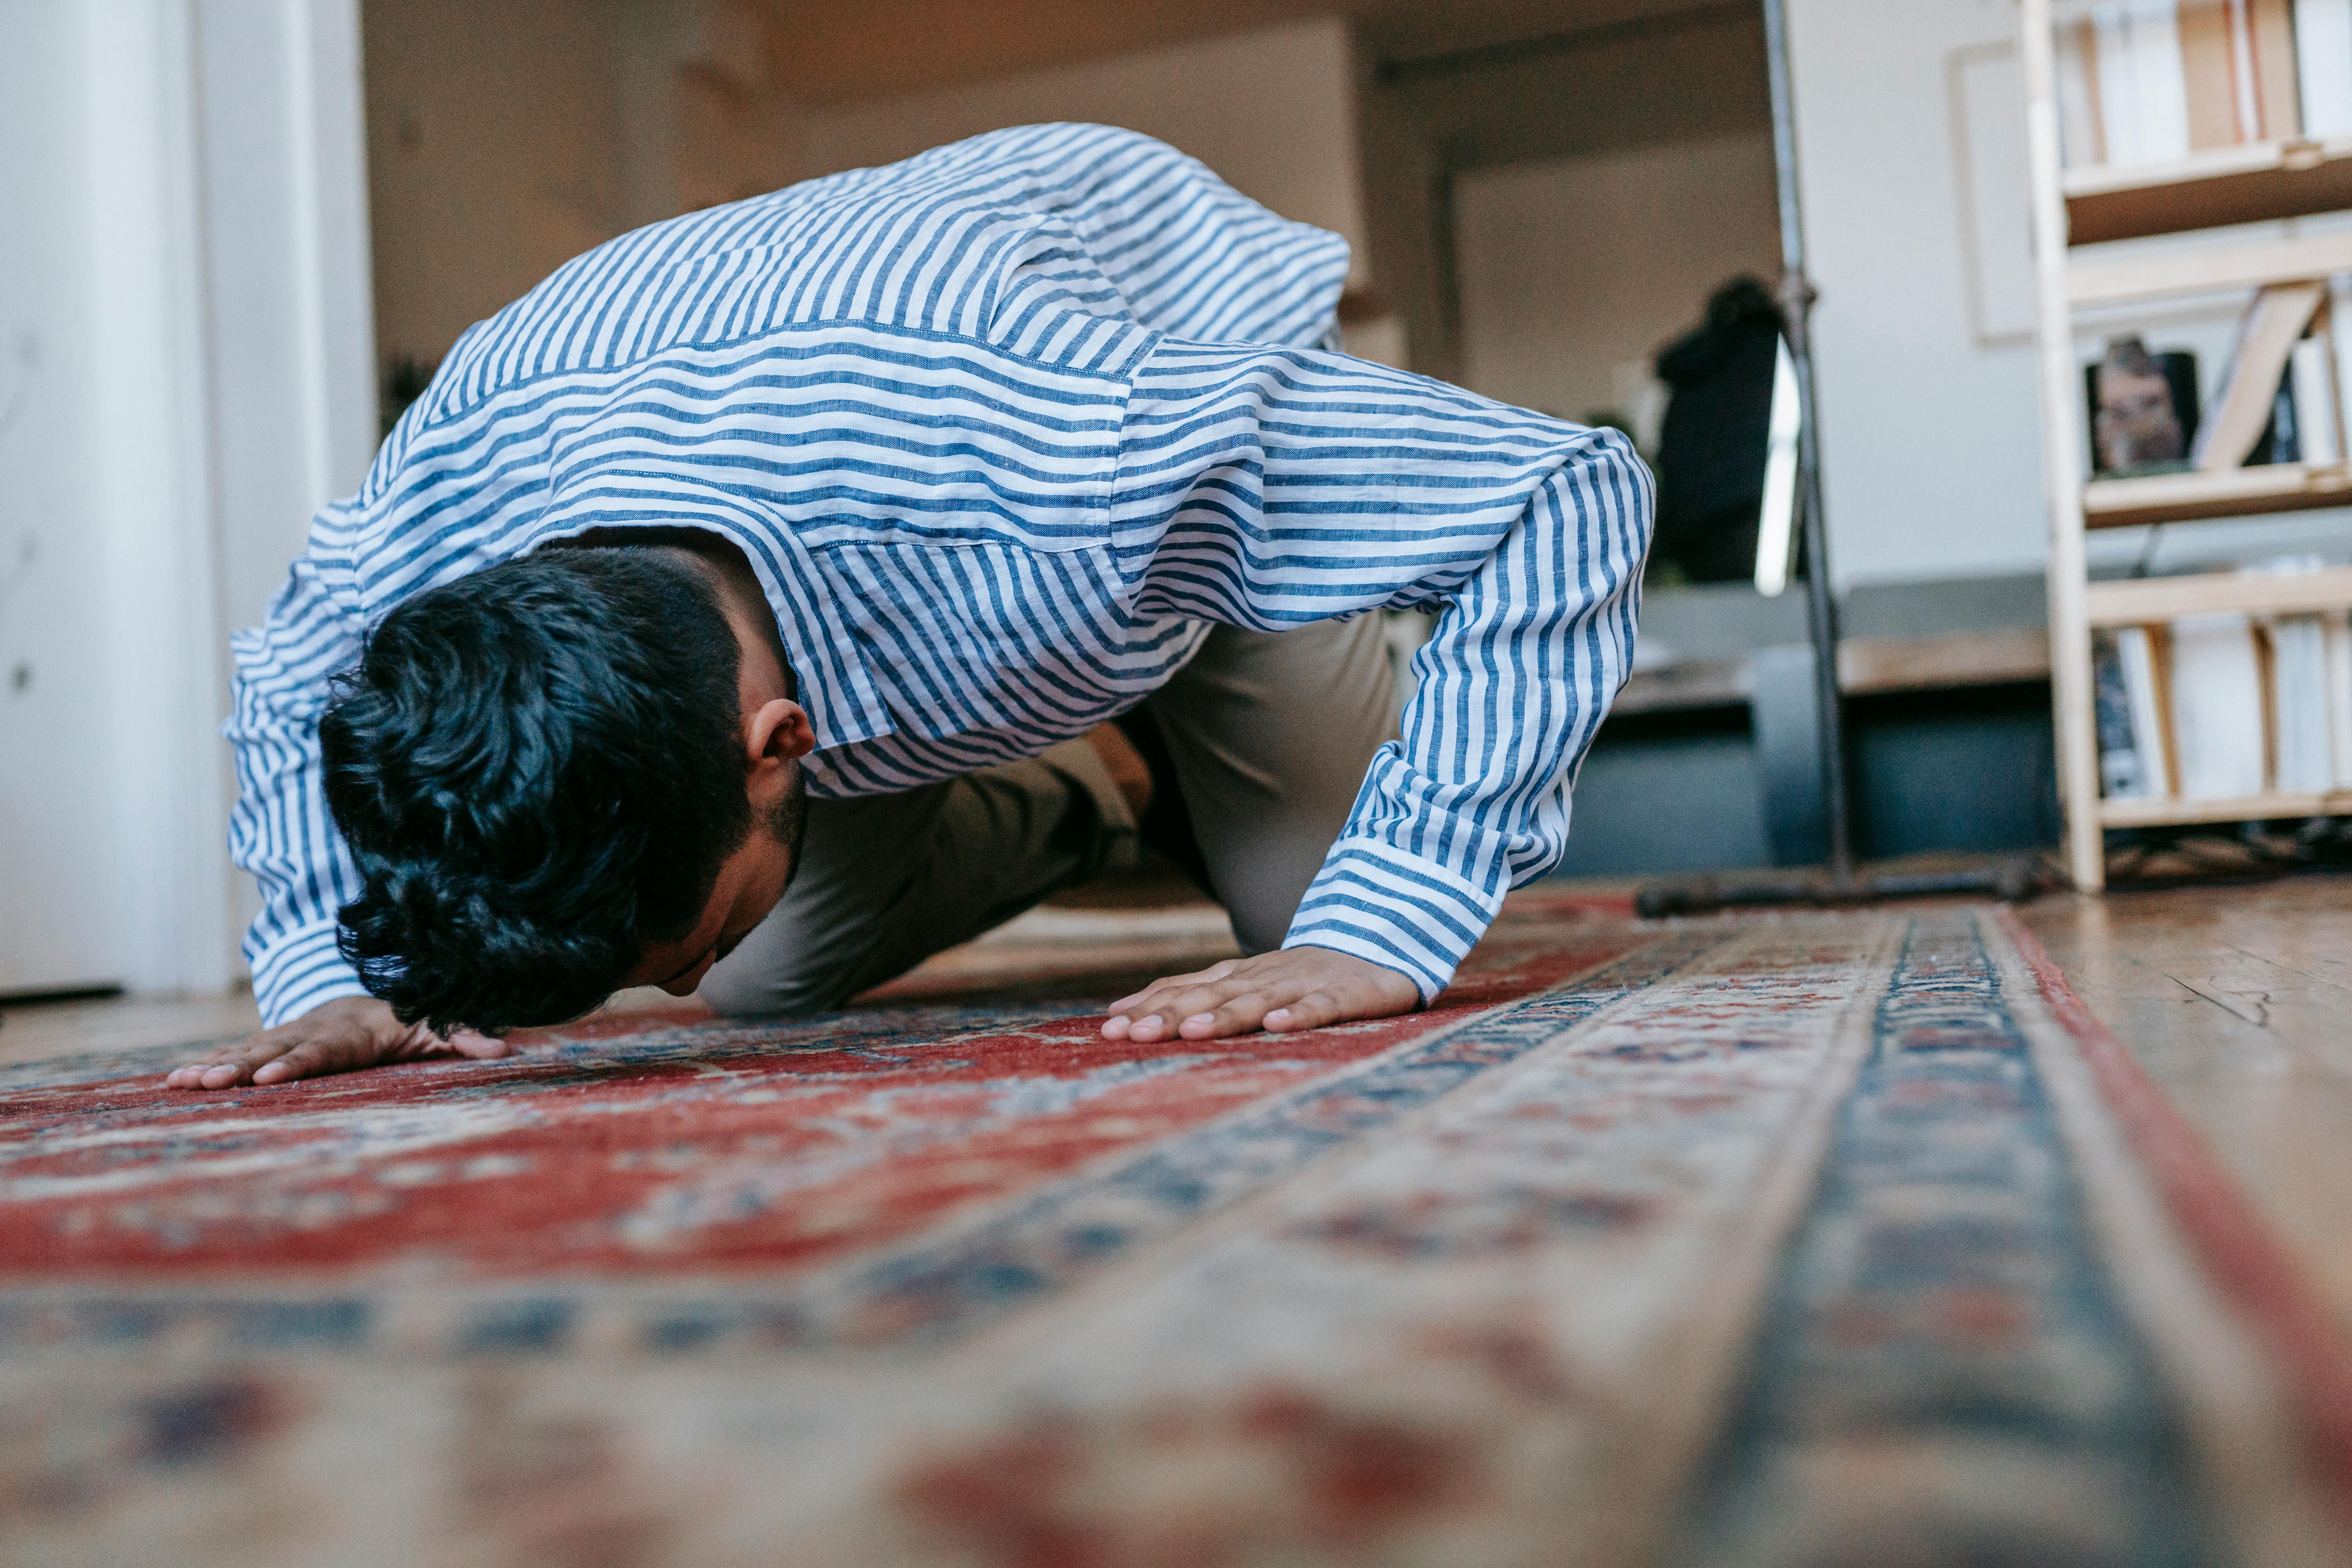 man in blue and white stripe dress shirt bowing down on red and blue area rug